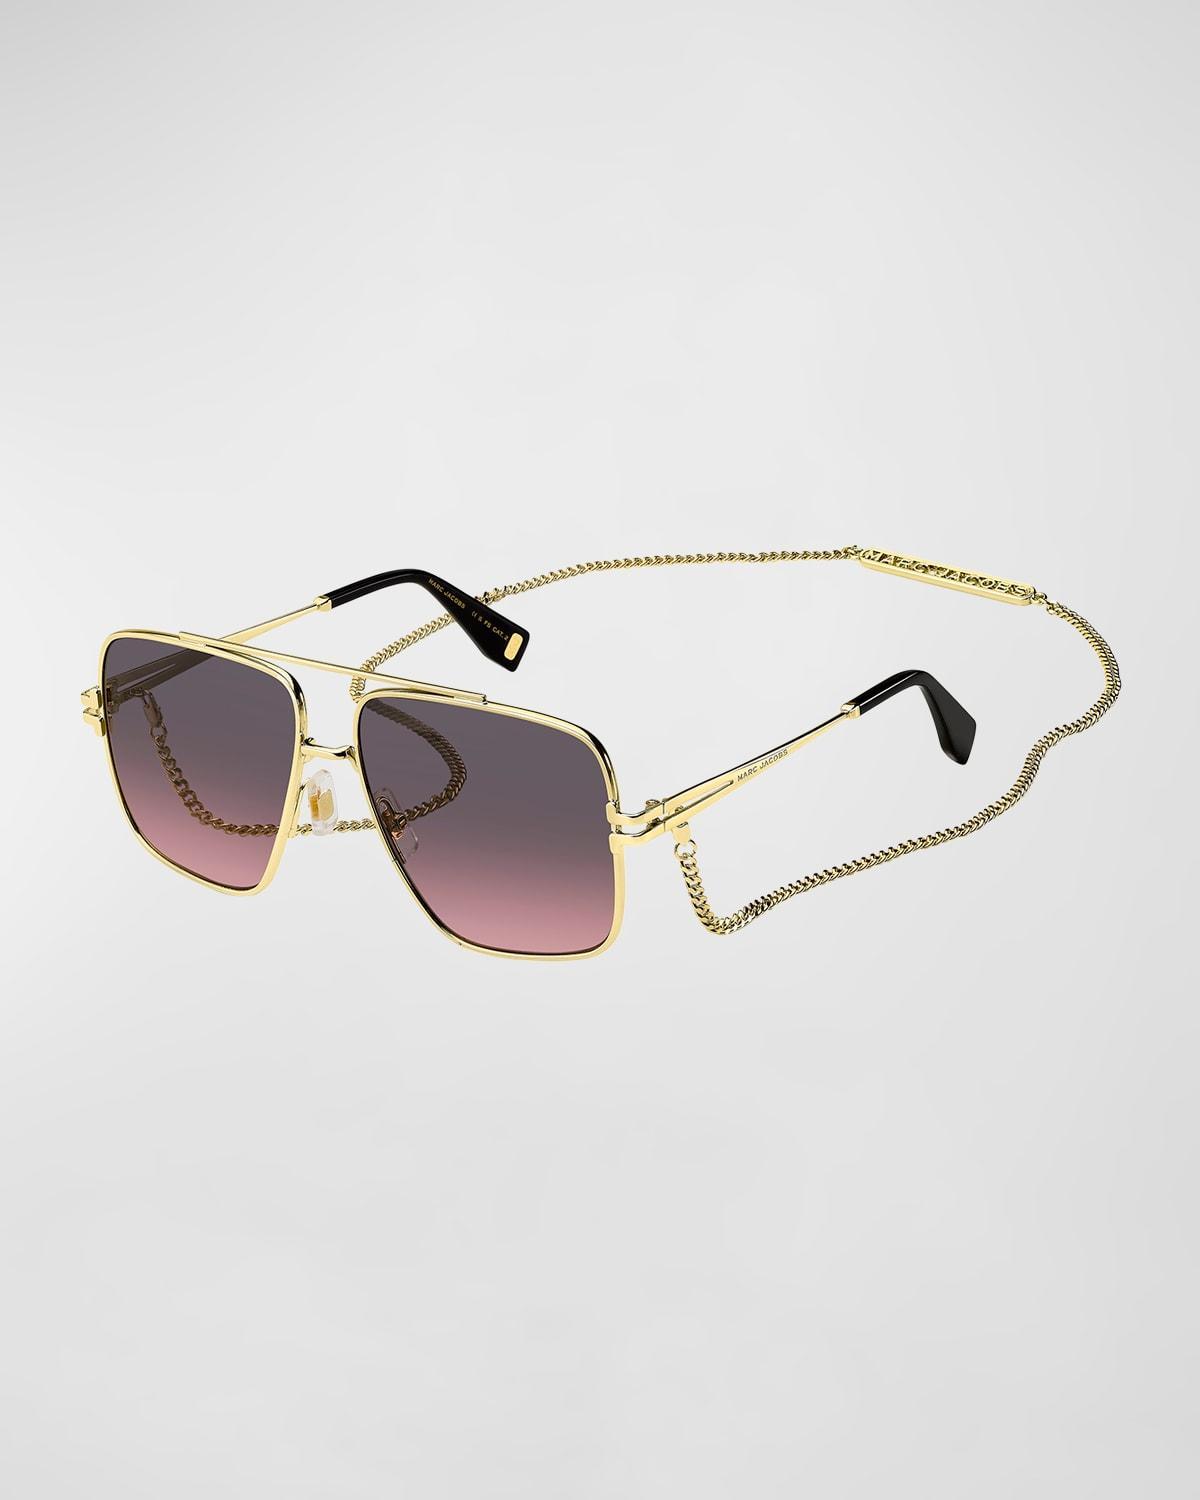 Marc Jacobs 59mm Gradient Square Sunglasses with Chain Product Image